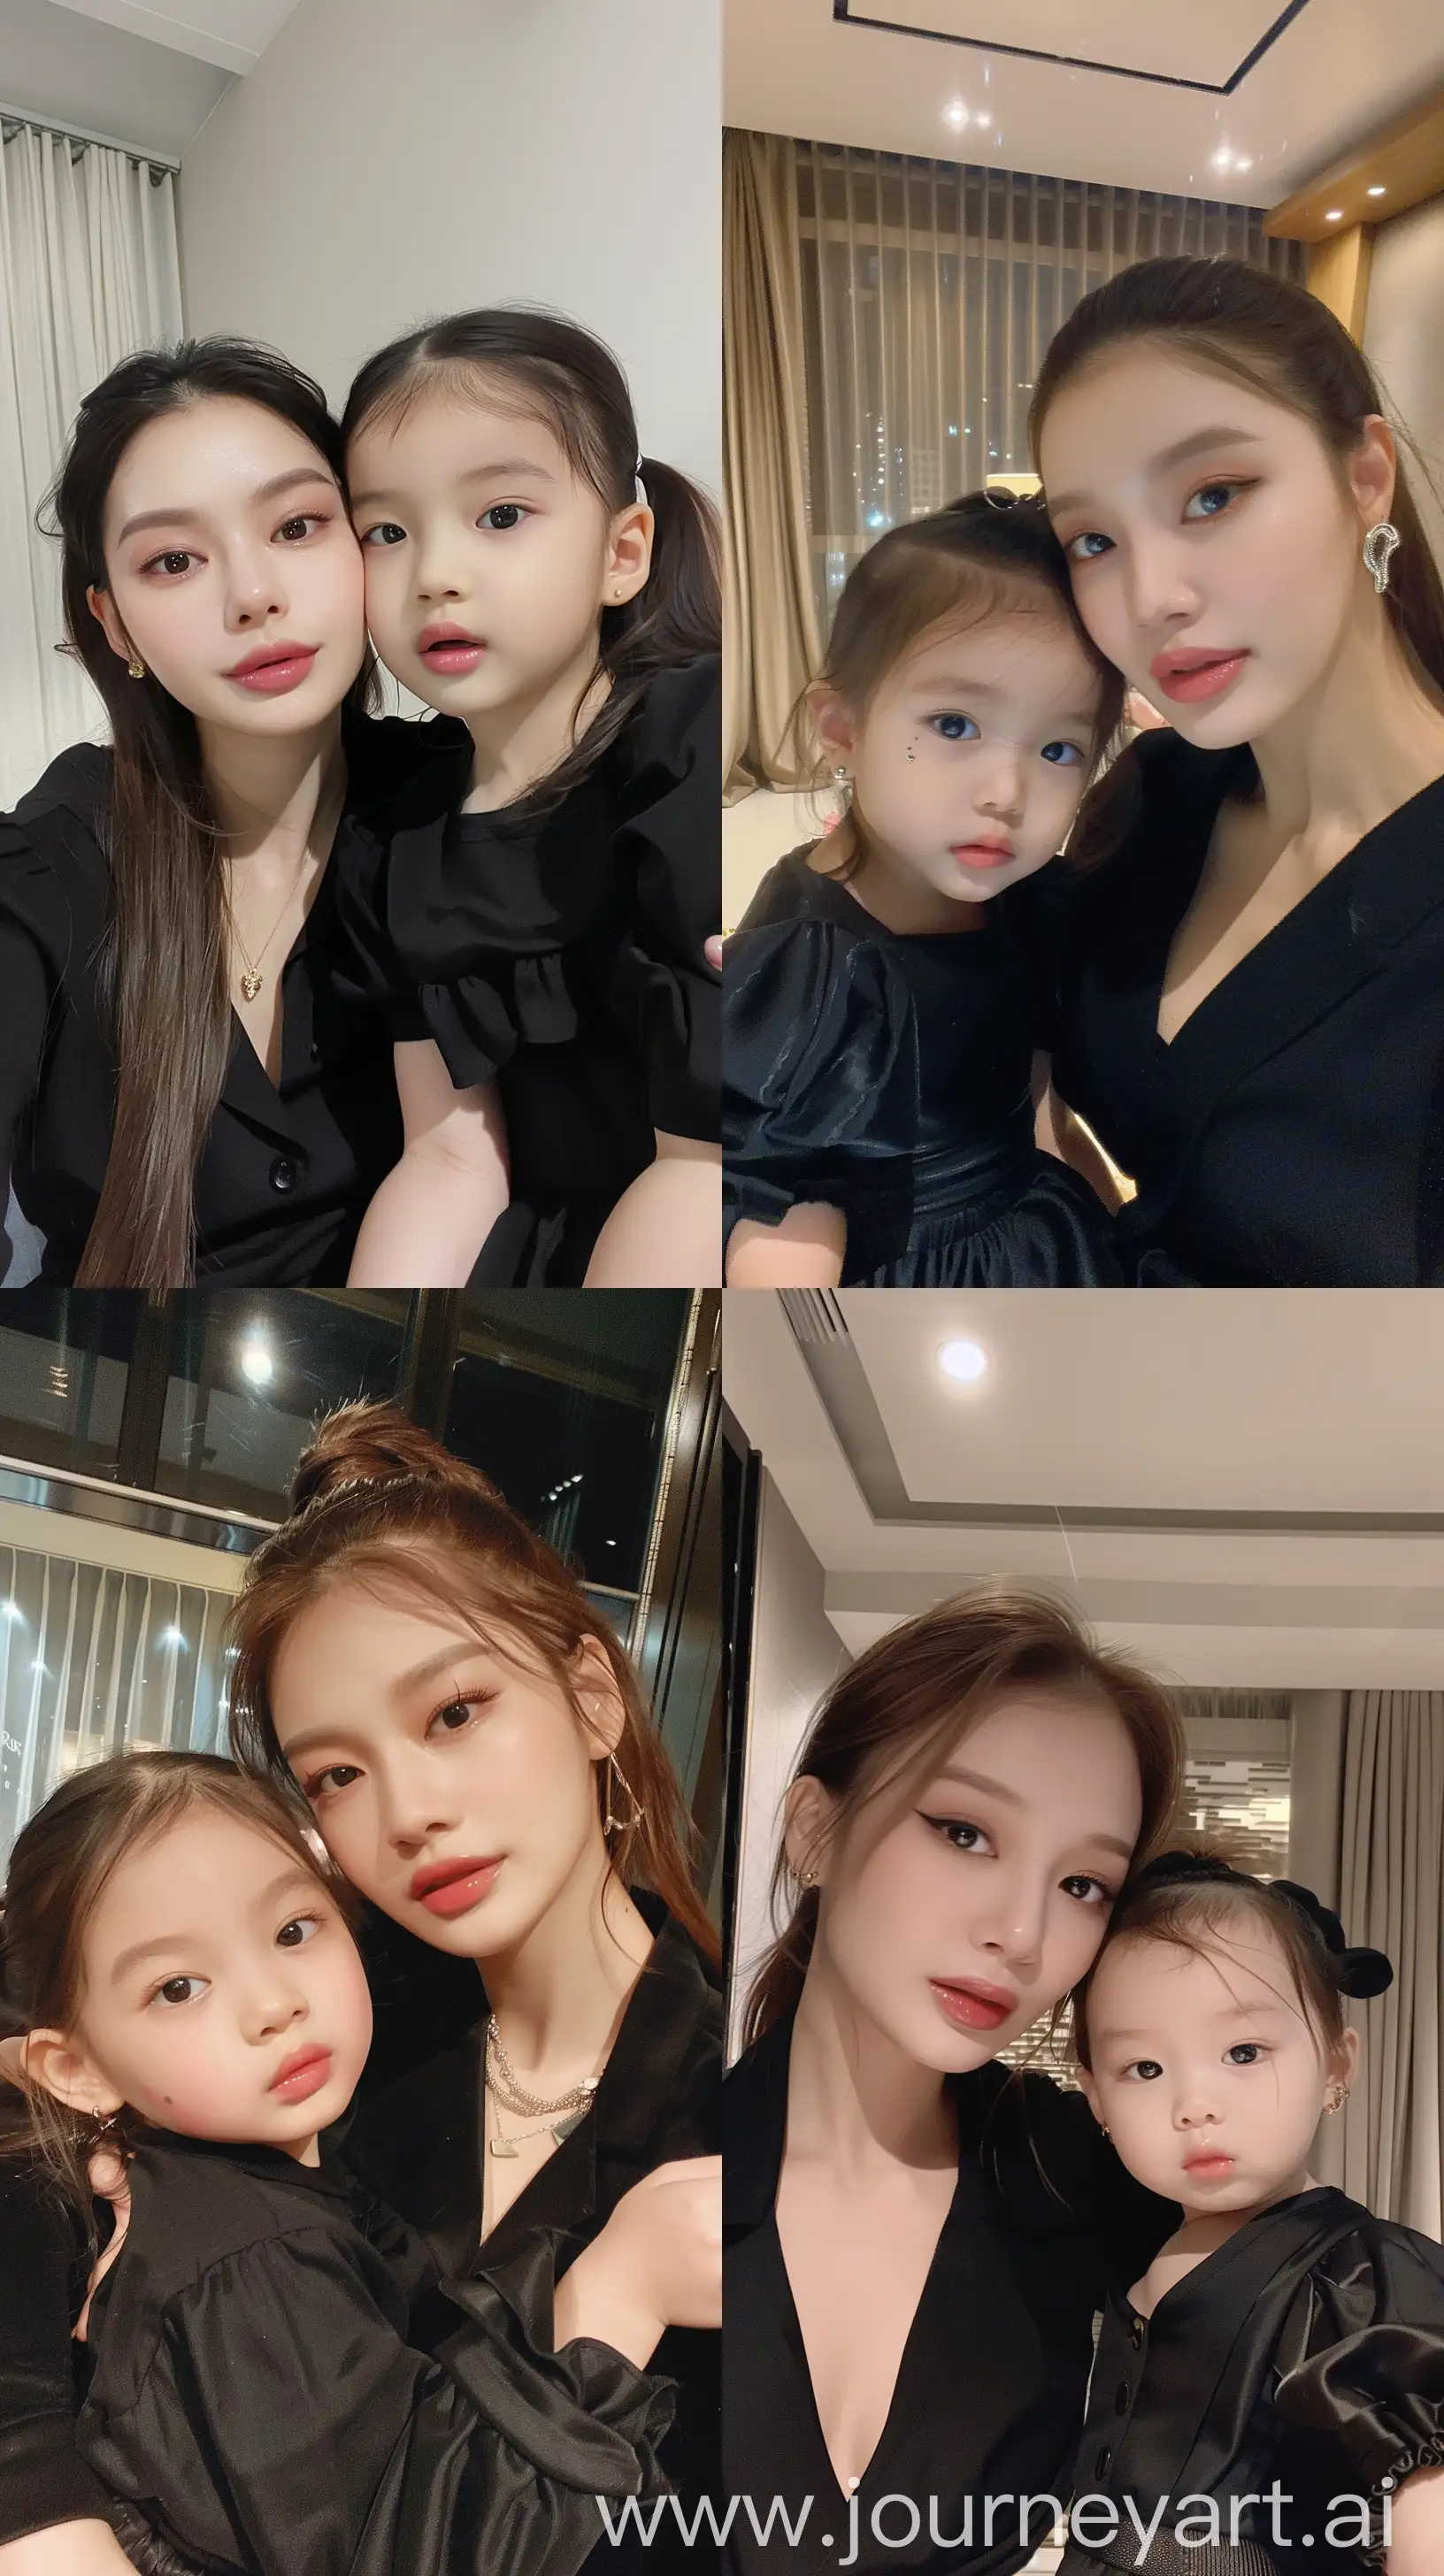 Blackpinks-Jennie-Aesthetic-Selfie-with-Young-Daughter-in-Elegant-Black-Outfit